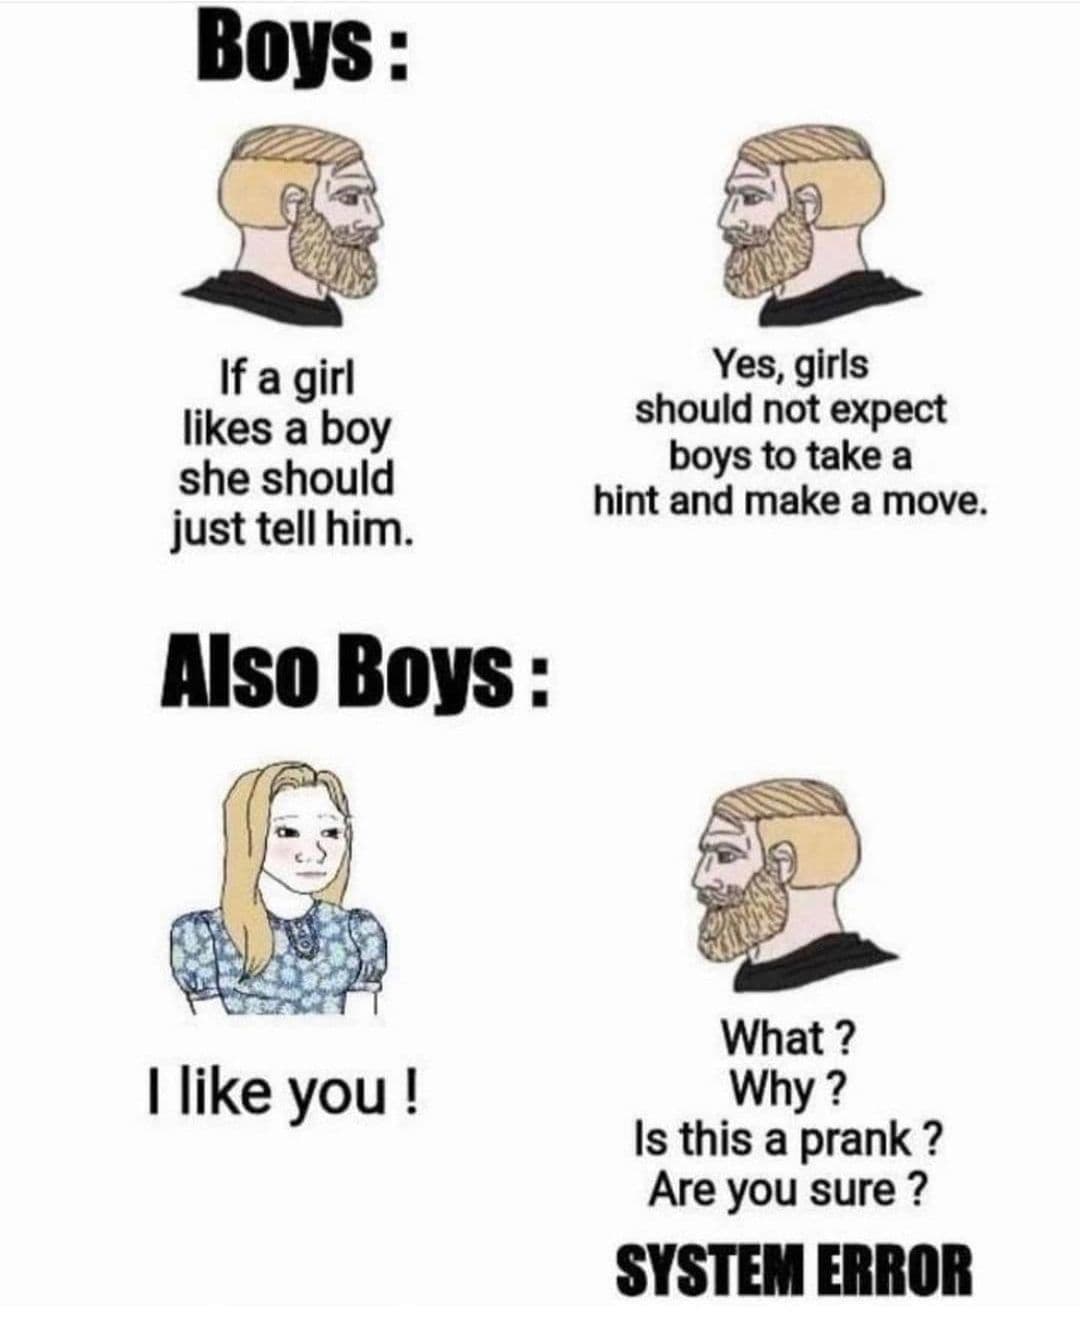 Boys: If a girl likes a boy she should just tell him.  Yes, girls should not expect boys to take a hint and make a move.  Also Boys: I like you!  What? Why? Is this a prank? Are you sure? System Error.